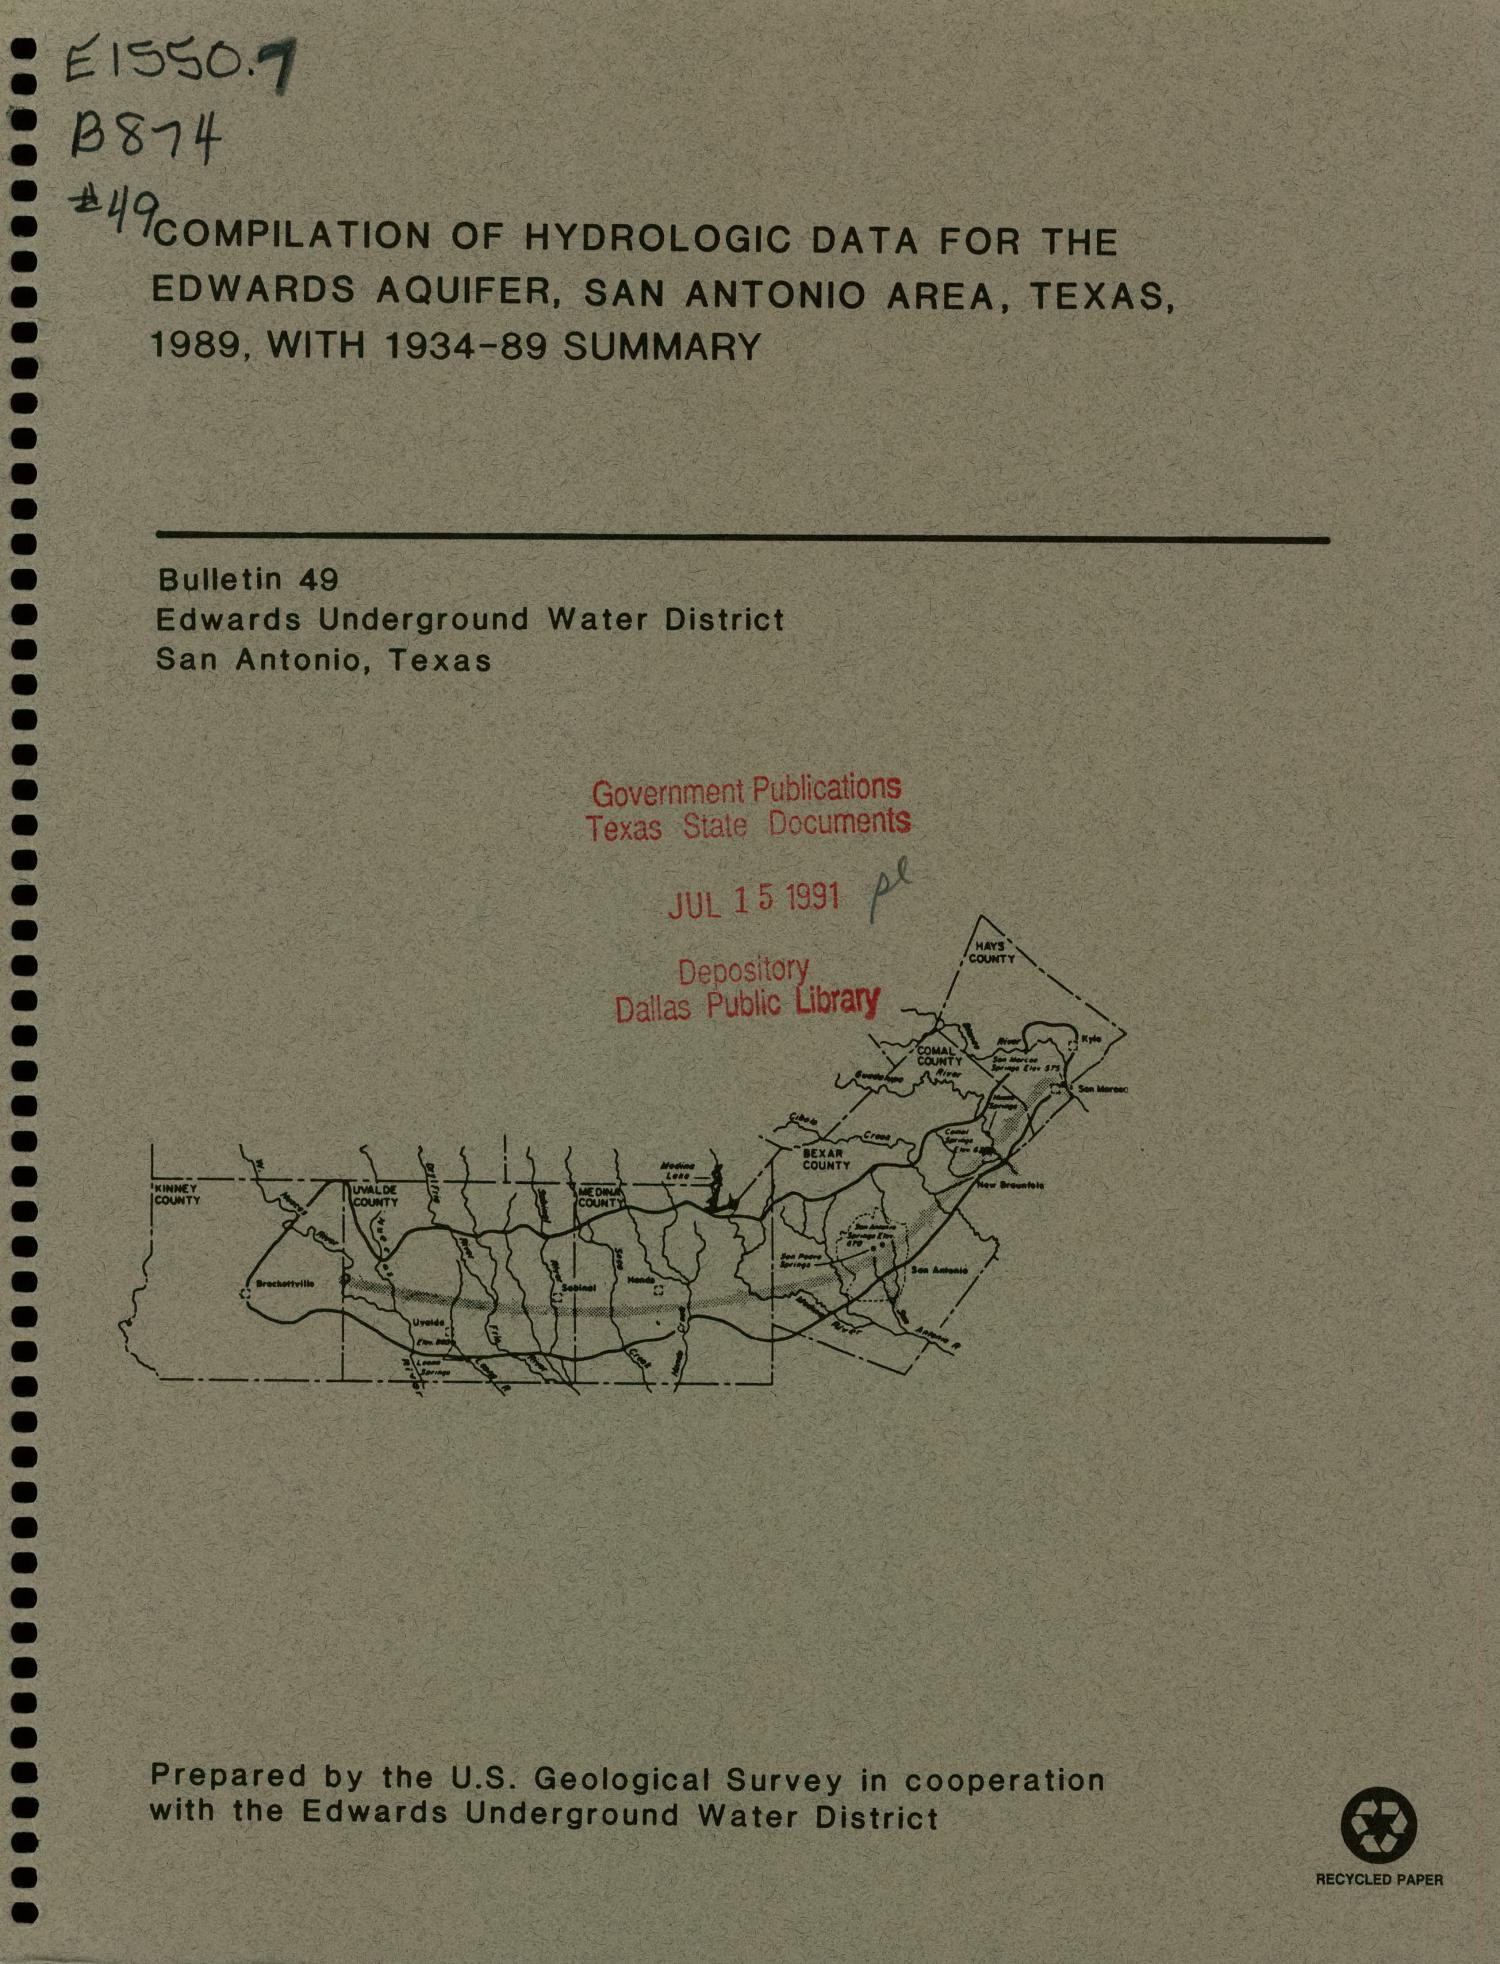 Compilation of Hydrologic Data for the Edwards Aquifer, San Antonio, Texas: 1989, with 1934-89 Summary
                                                
                                                    FRONT COVER
                                                